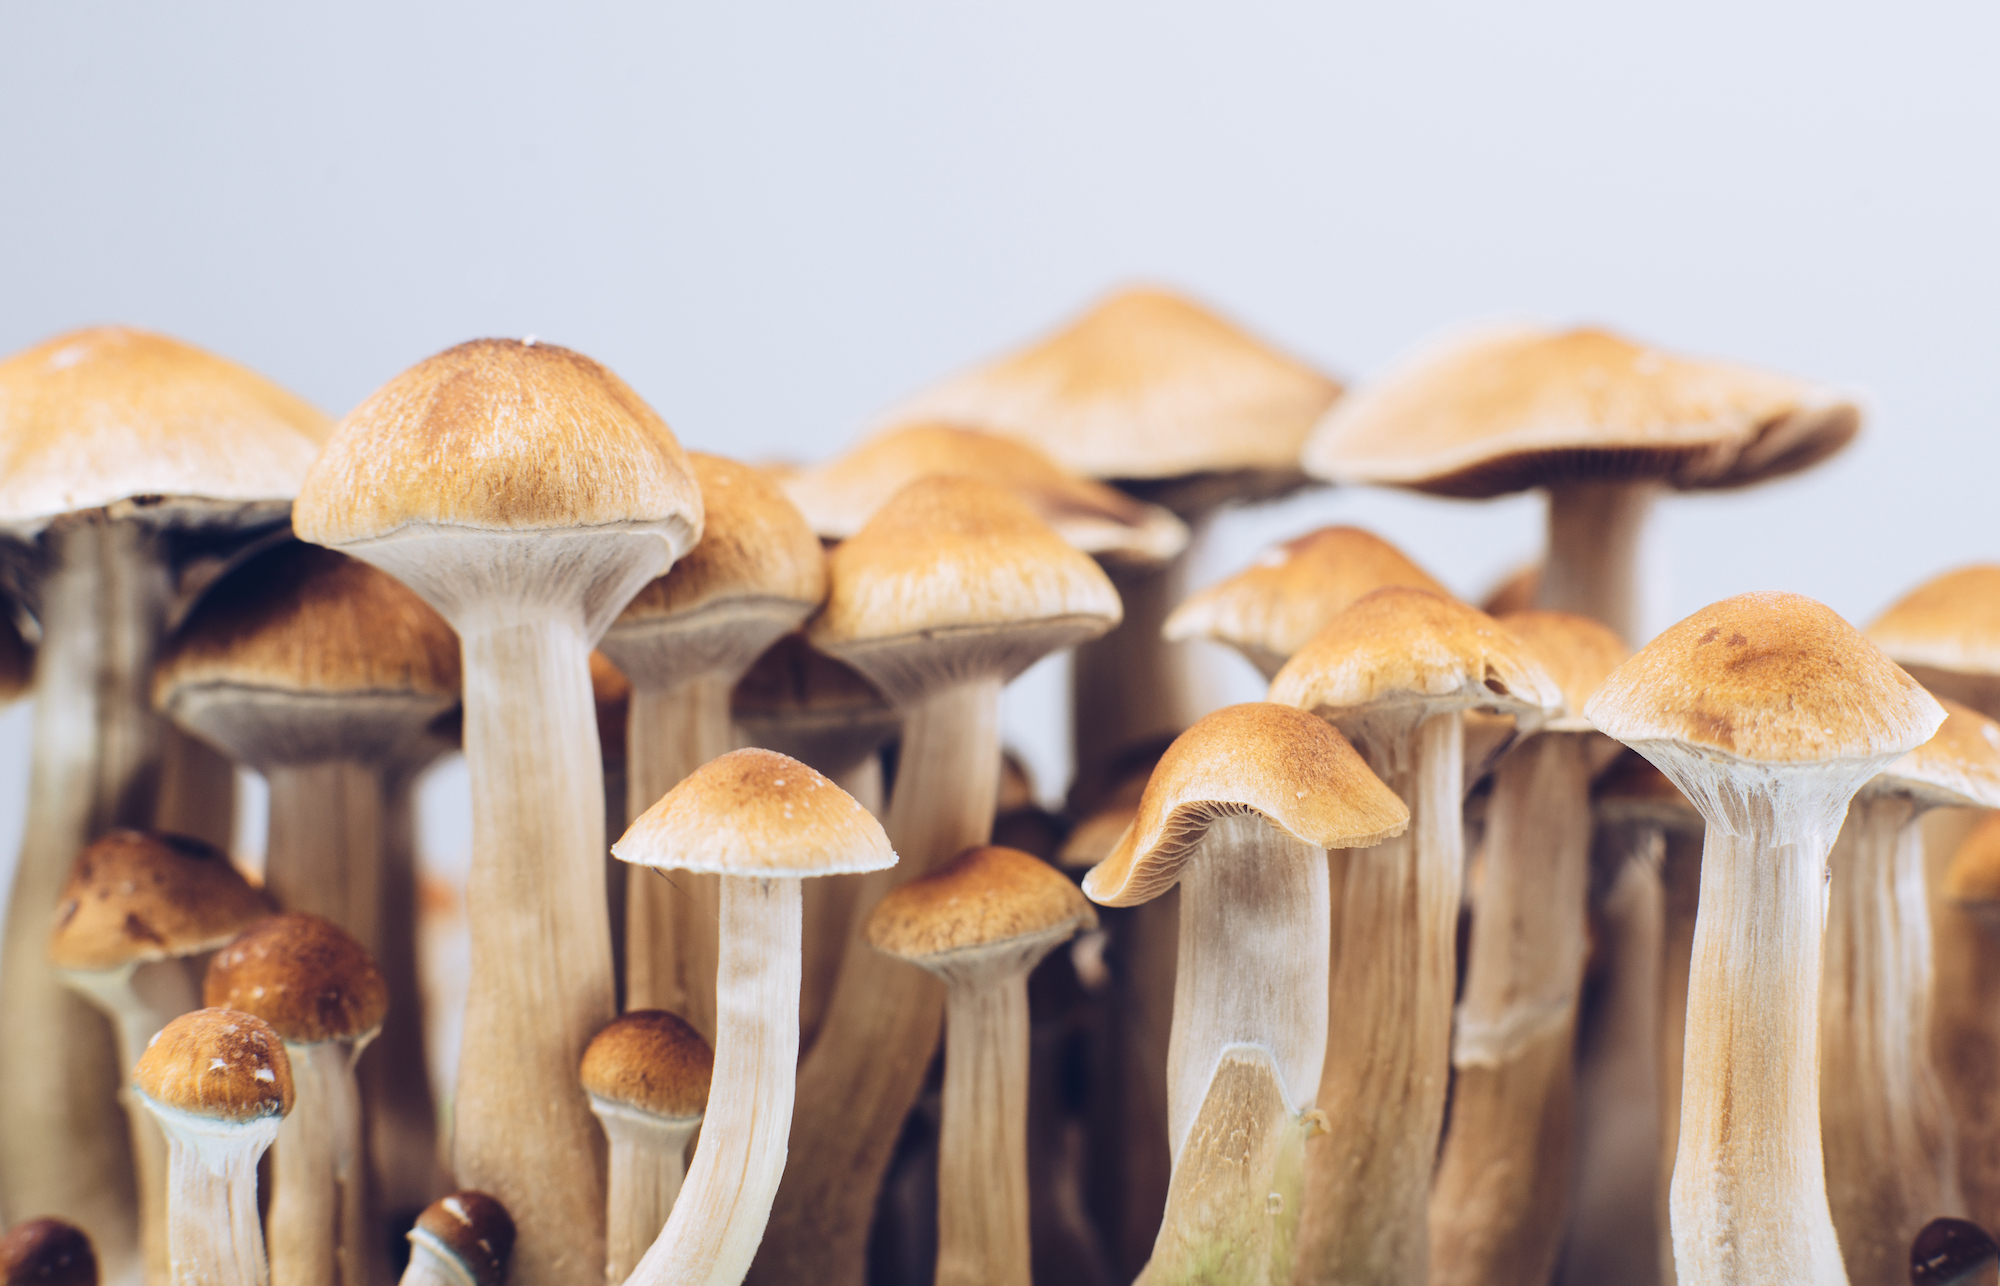 some EXTREMELY useful information for puff shrooms, the photo